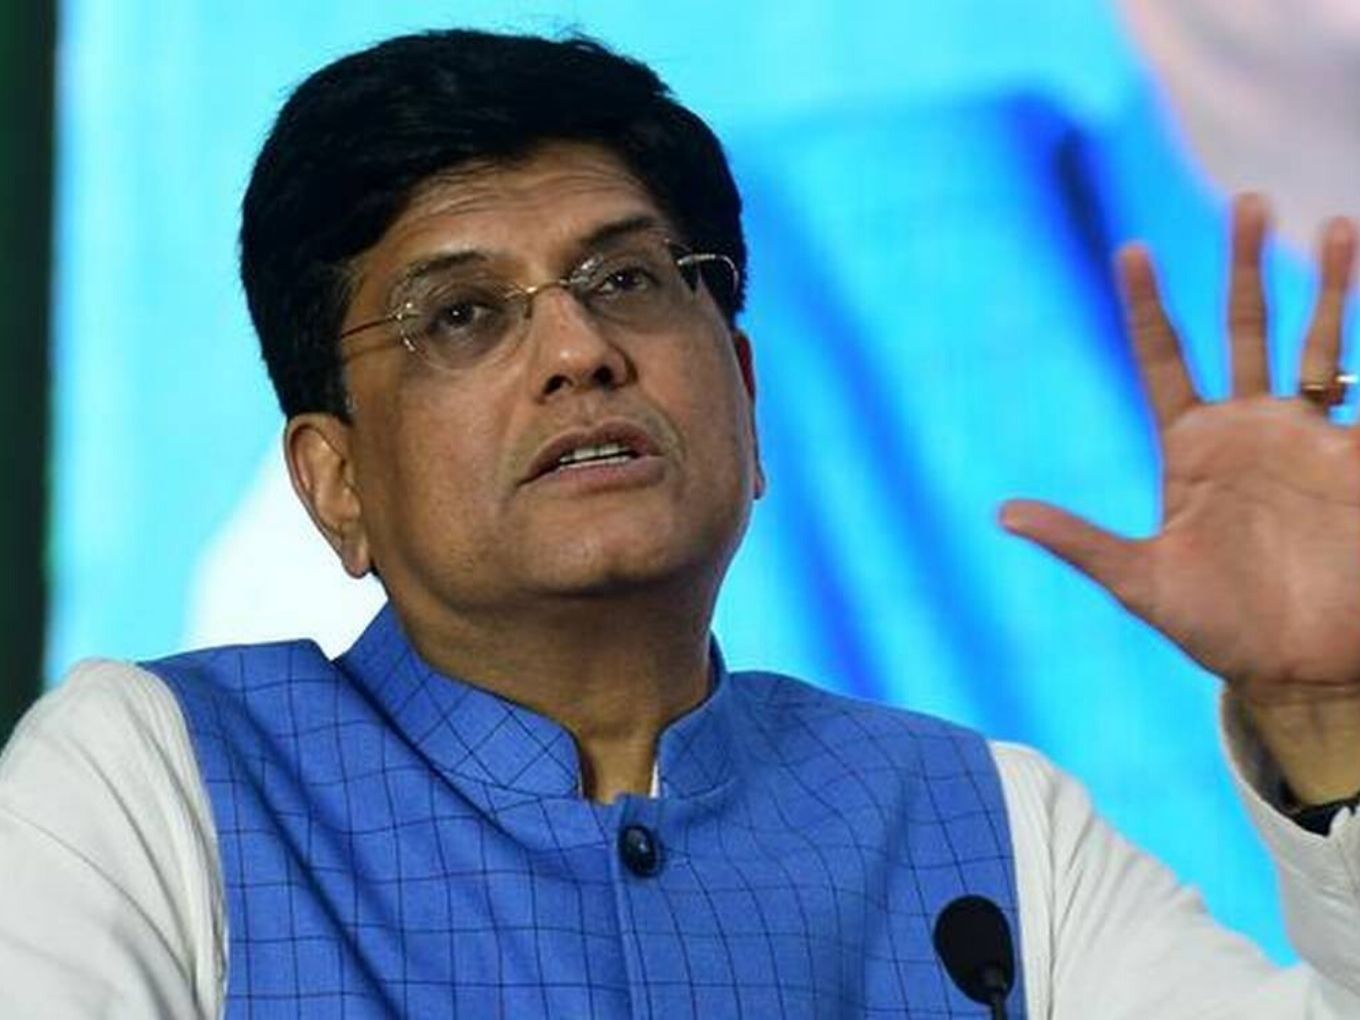 Piyush Goyal Doesn’t Want To Buy What Amazon Is Selling